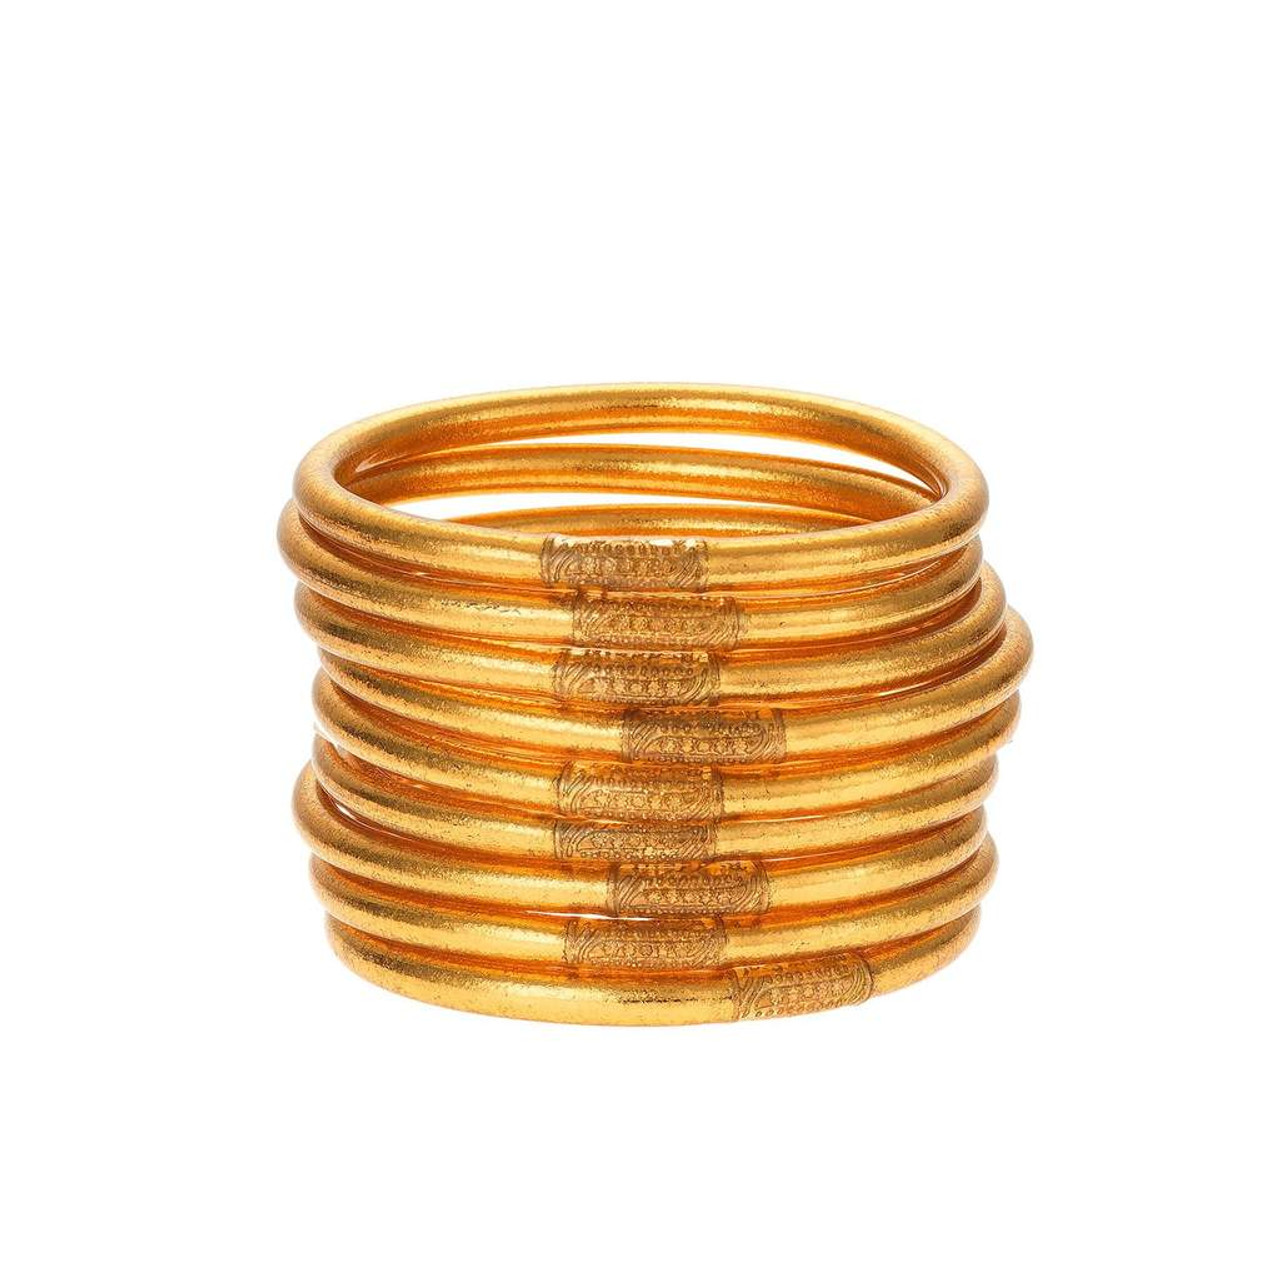 New Buddha Girl Bracelets for Women Fashion Silicone Weave Bracelet  Available All Weather Gold Foil Bangle Set Jewelry Accessory